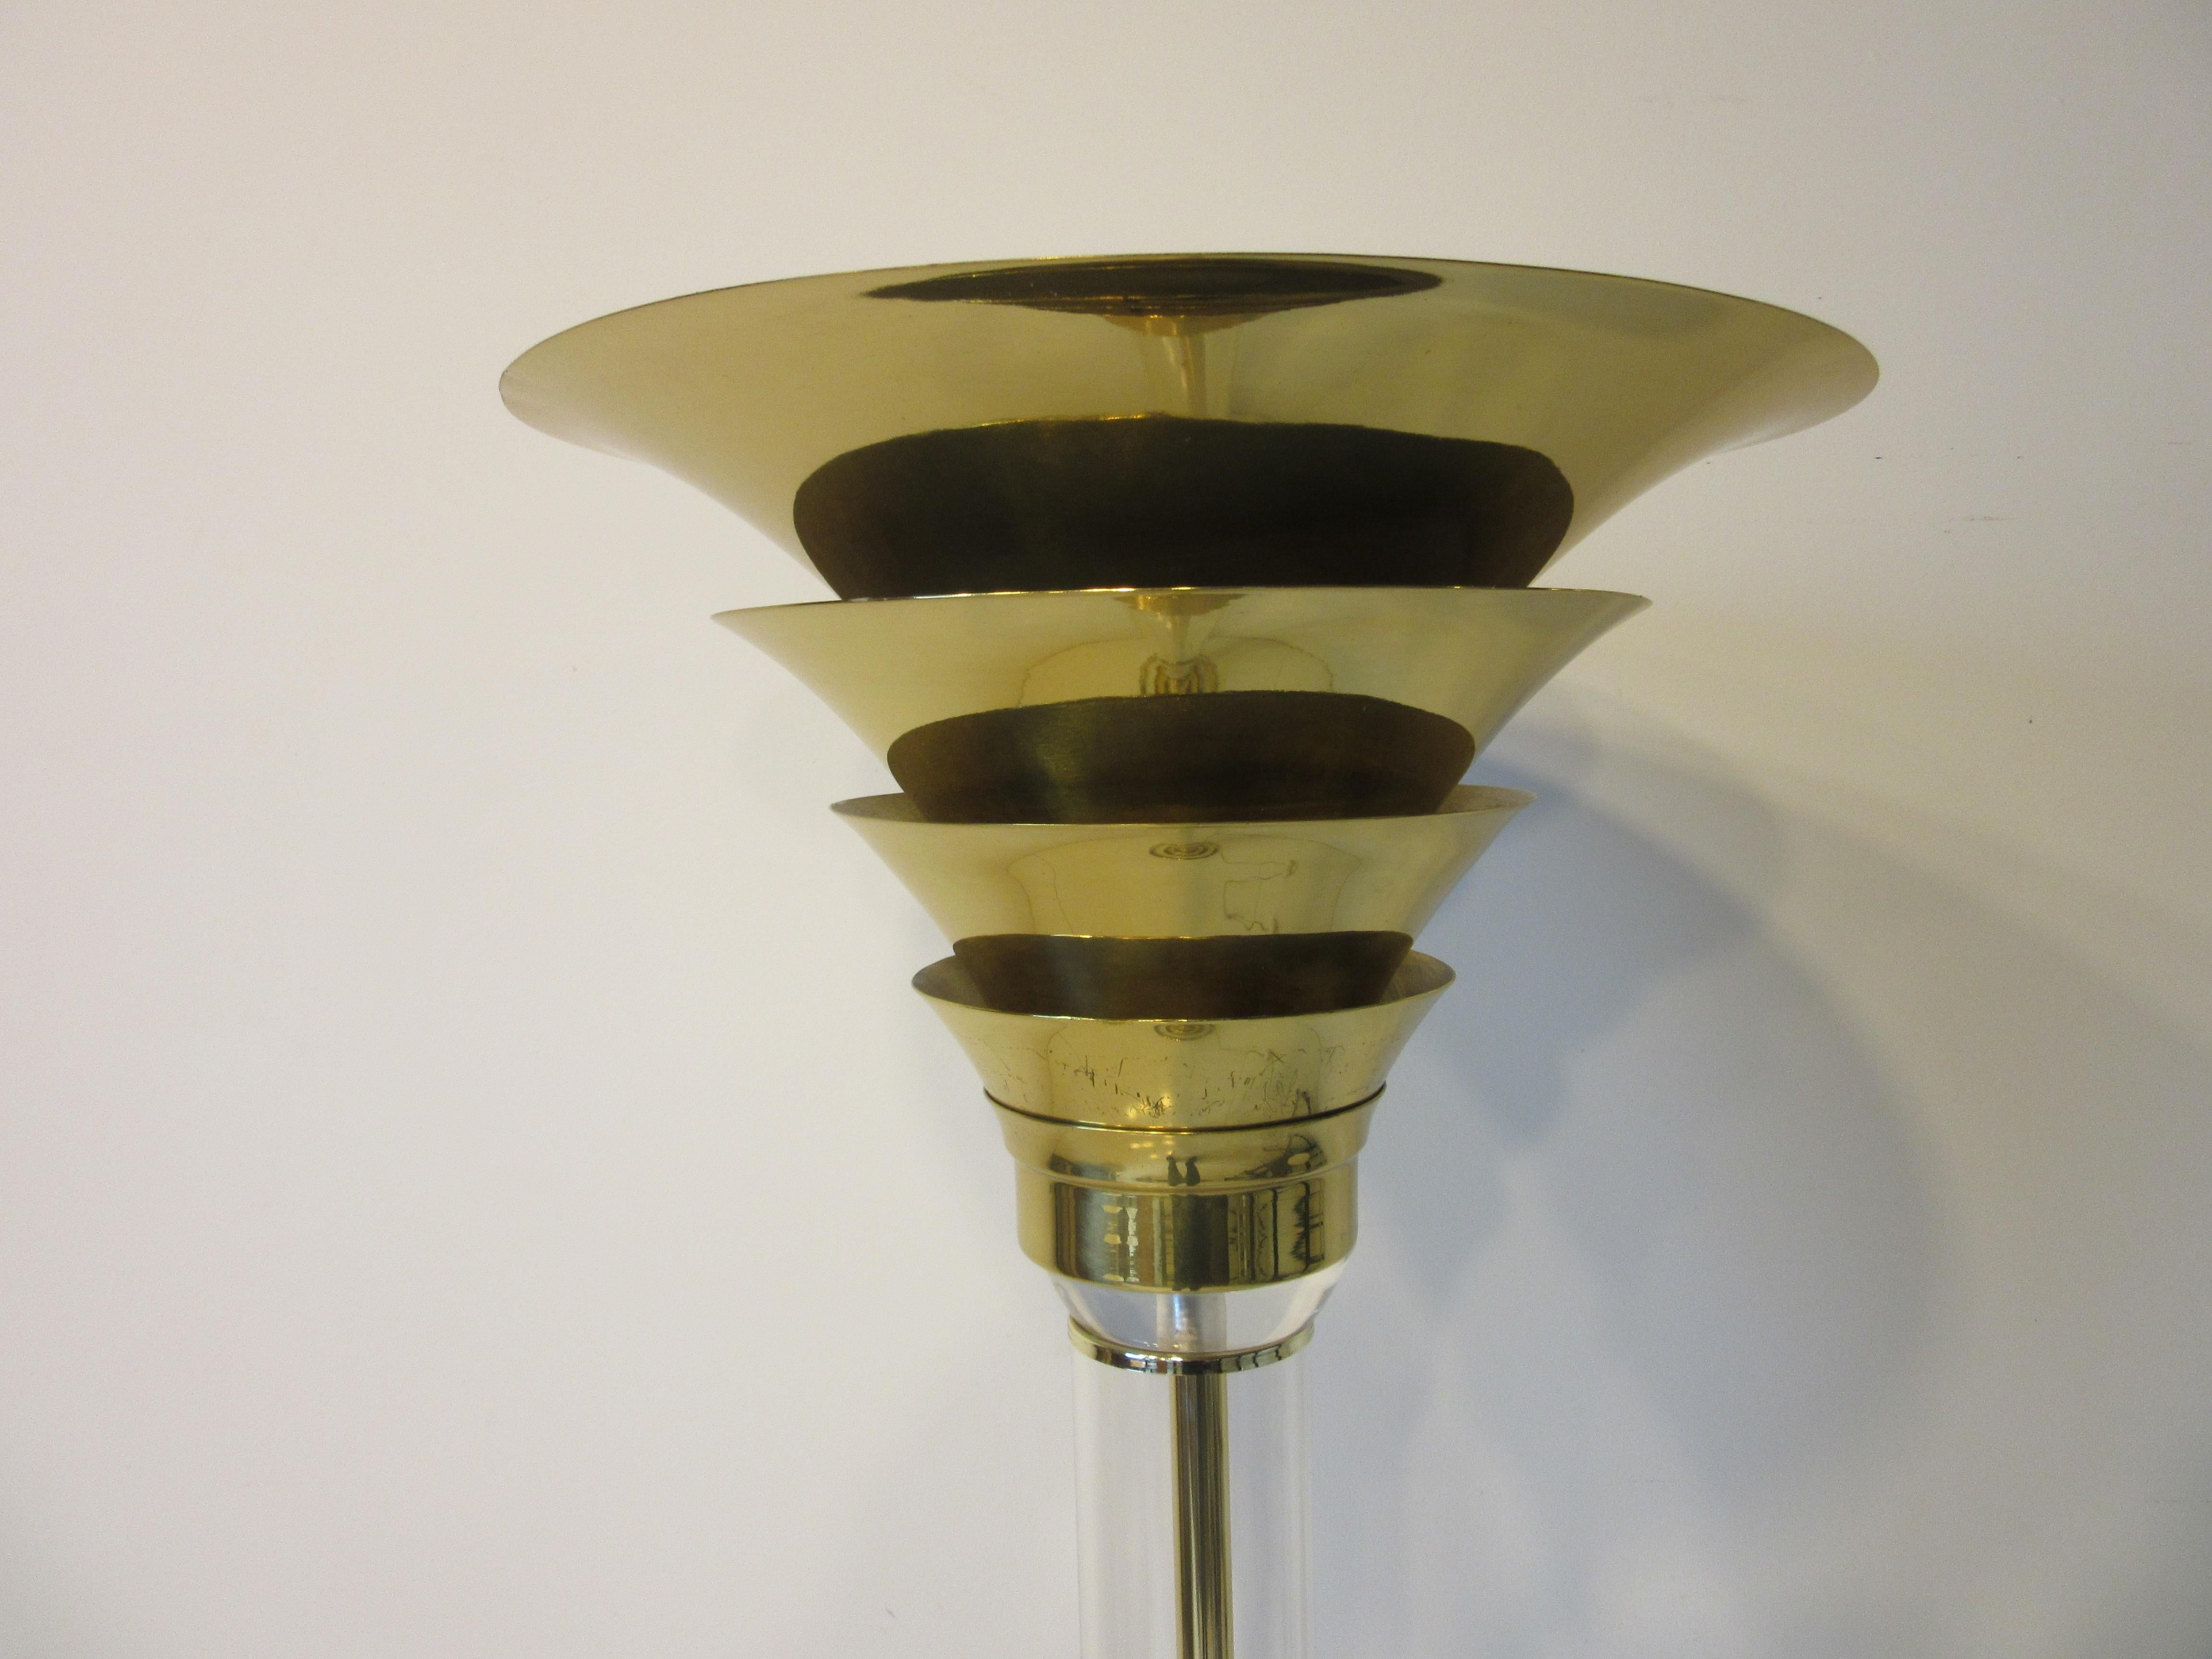 A beautiful floor lamp / touche with fluted brass shade sitting on a Lucite post with a brass rod inside to hide the wring on a round Lucite base with brass rings , clear feet and foot switch . Well made in the manner of Karl Springer a lamp that